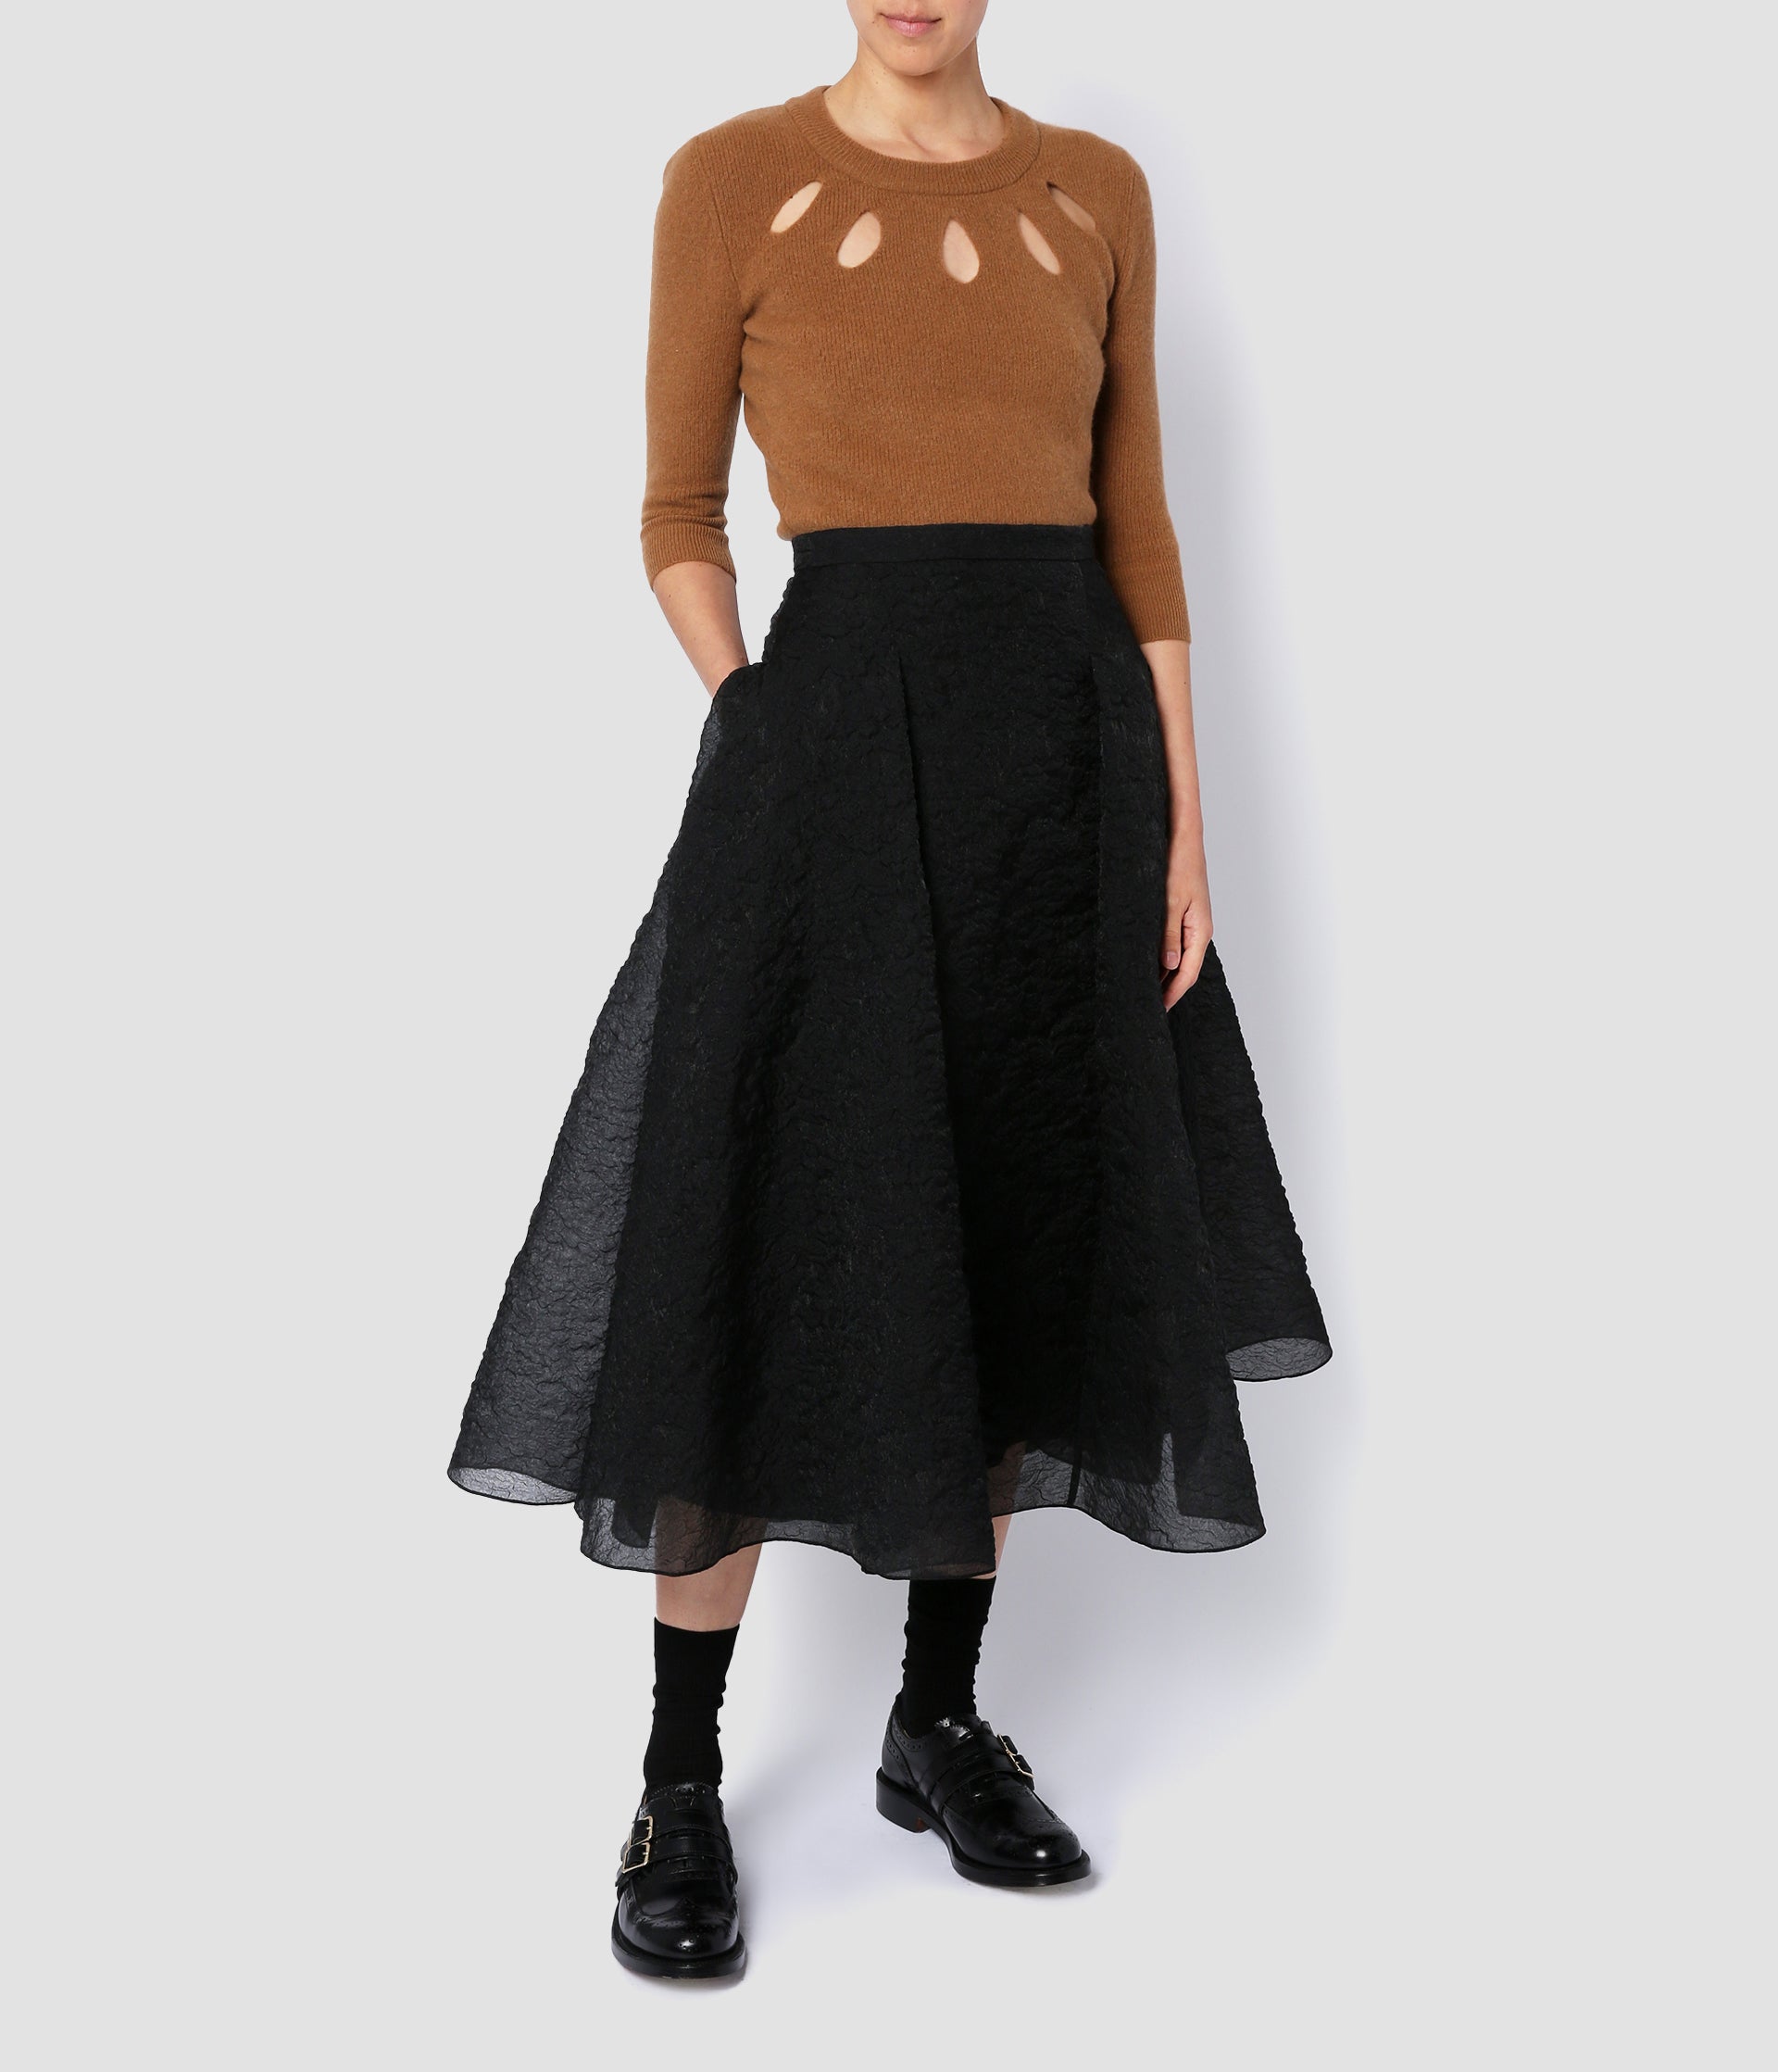 A flared, midi-length volume skirt in black organza cloque. The skirt is fitted at the waist, with pockets and large pleats to create the dramatic flared silhouette. 